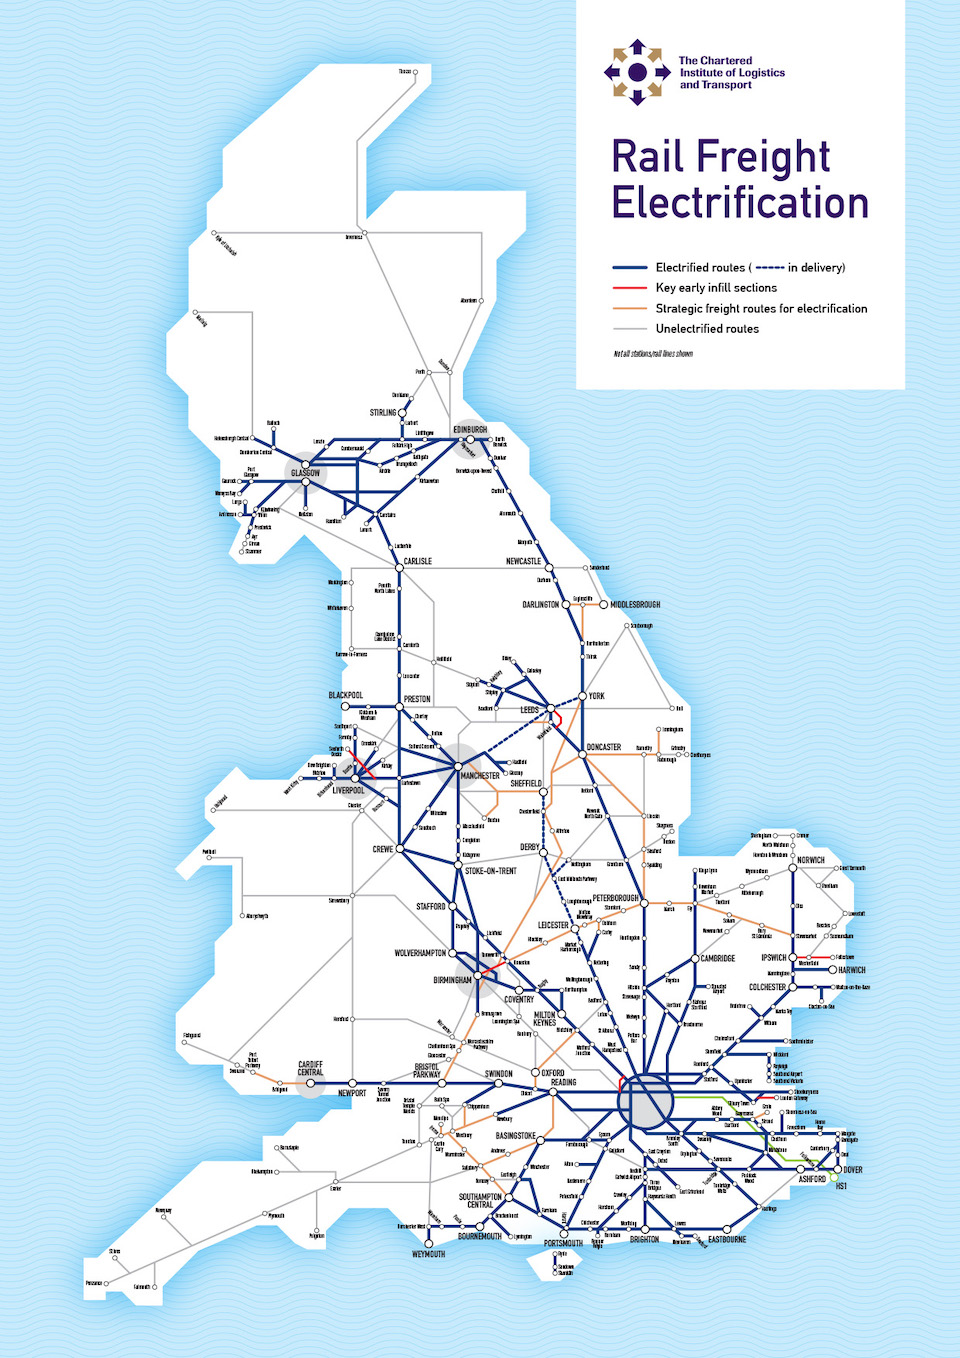 A map of Great Britain showing electrified railway lines